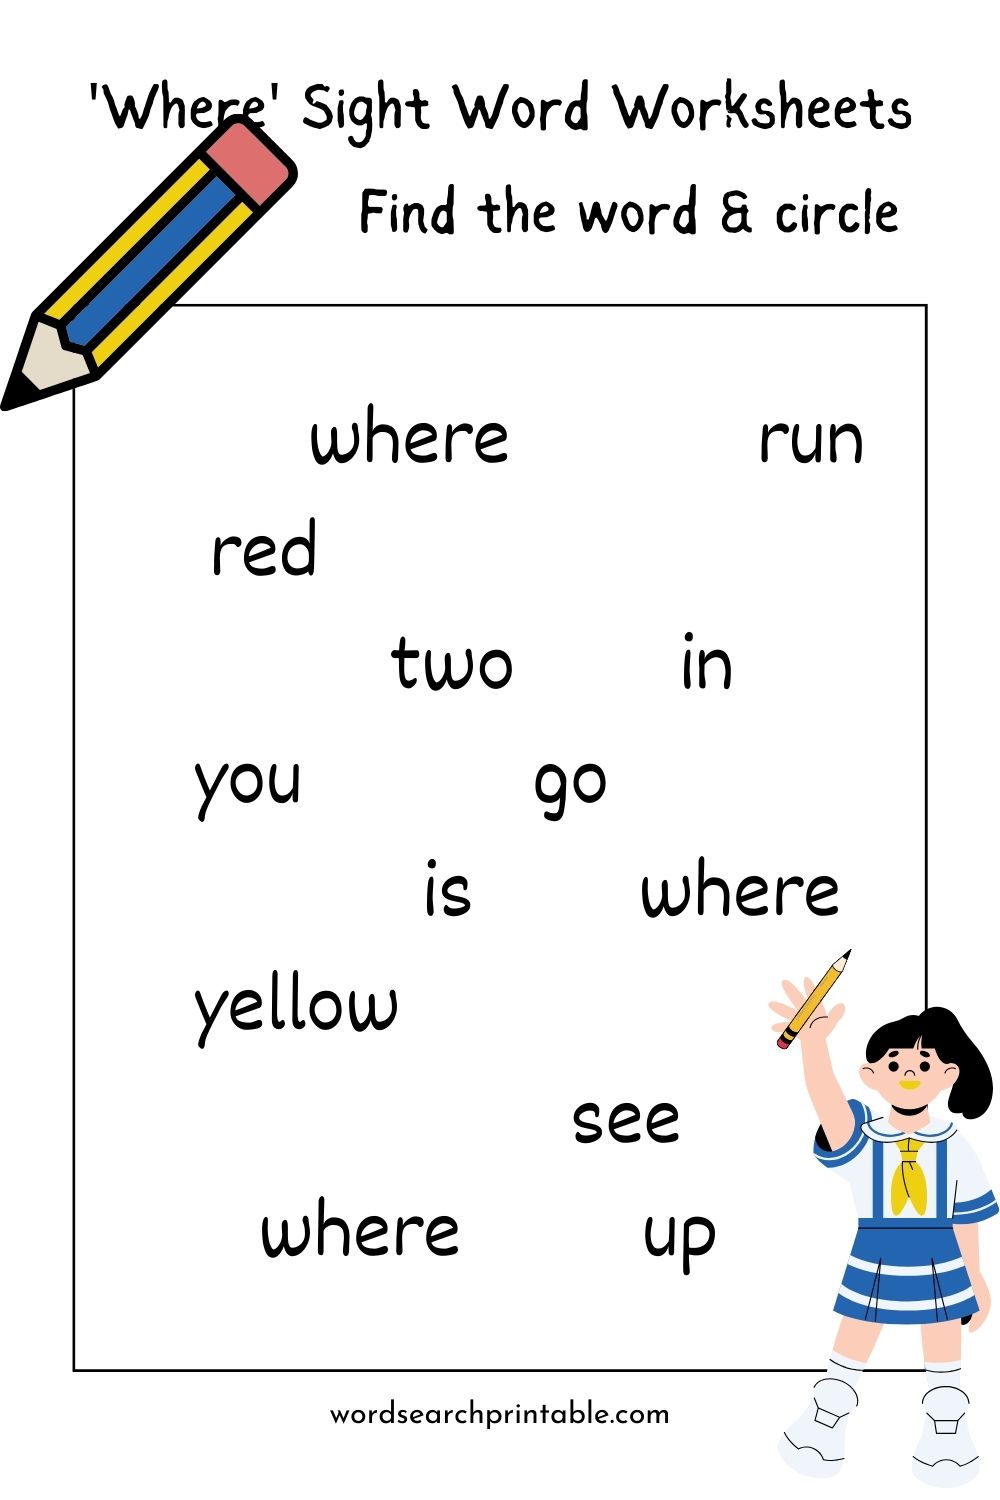 Find the sight word Where and circle it - 'Where' Sight Word Hunt